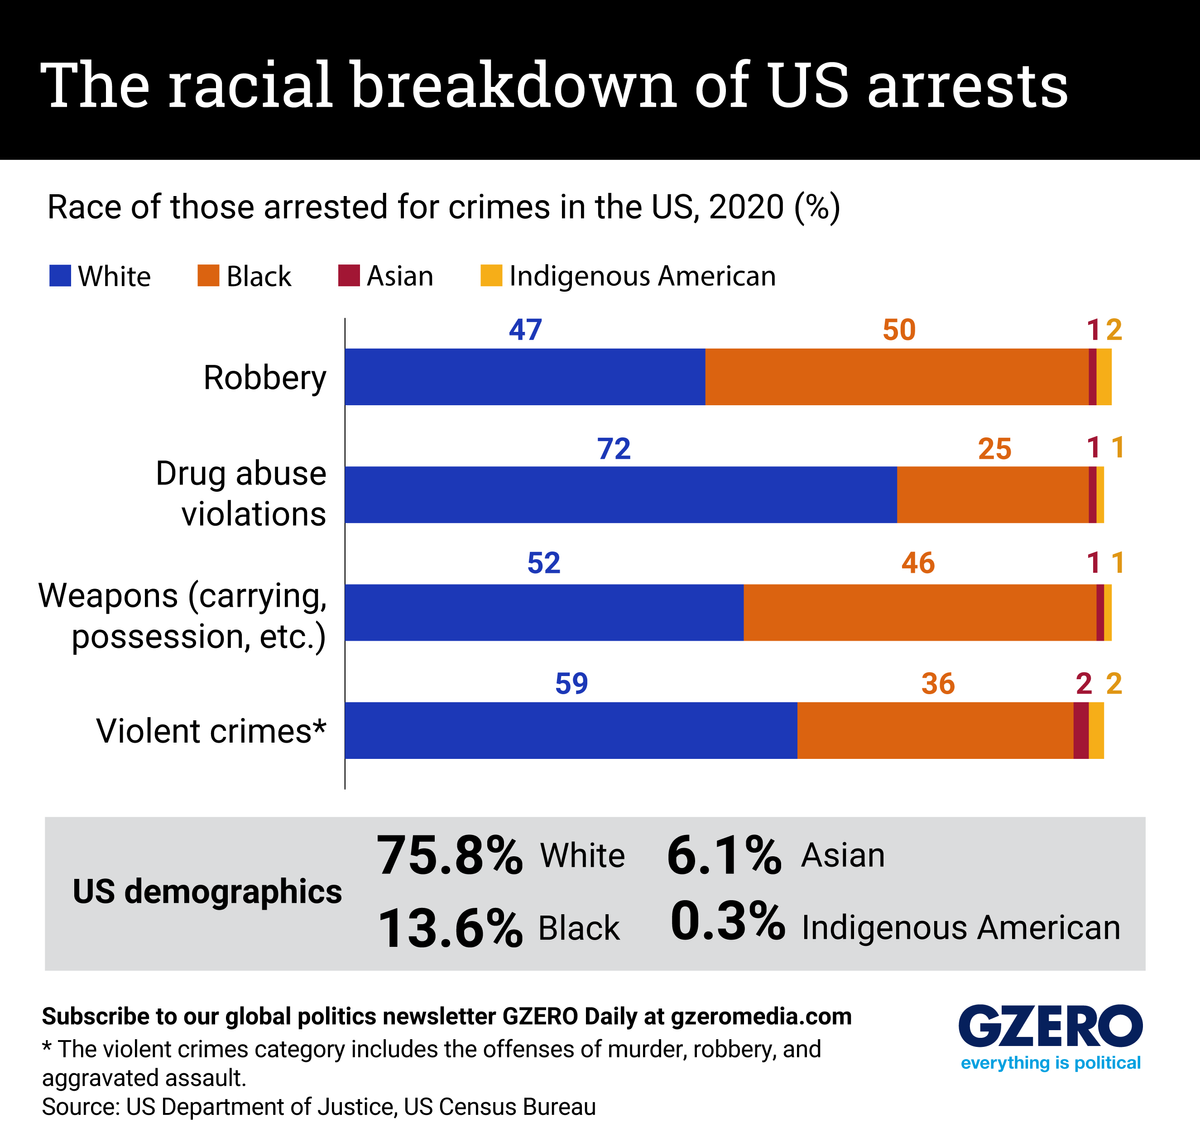 Demographics of those arrested for crimes in the US, 2020%